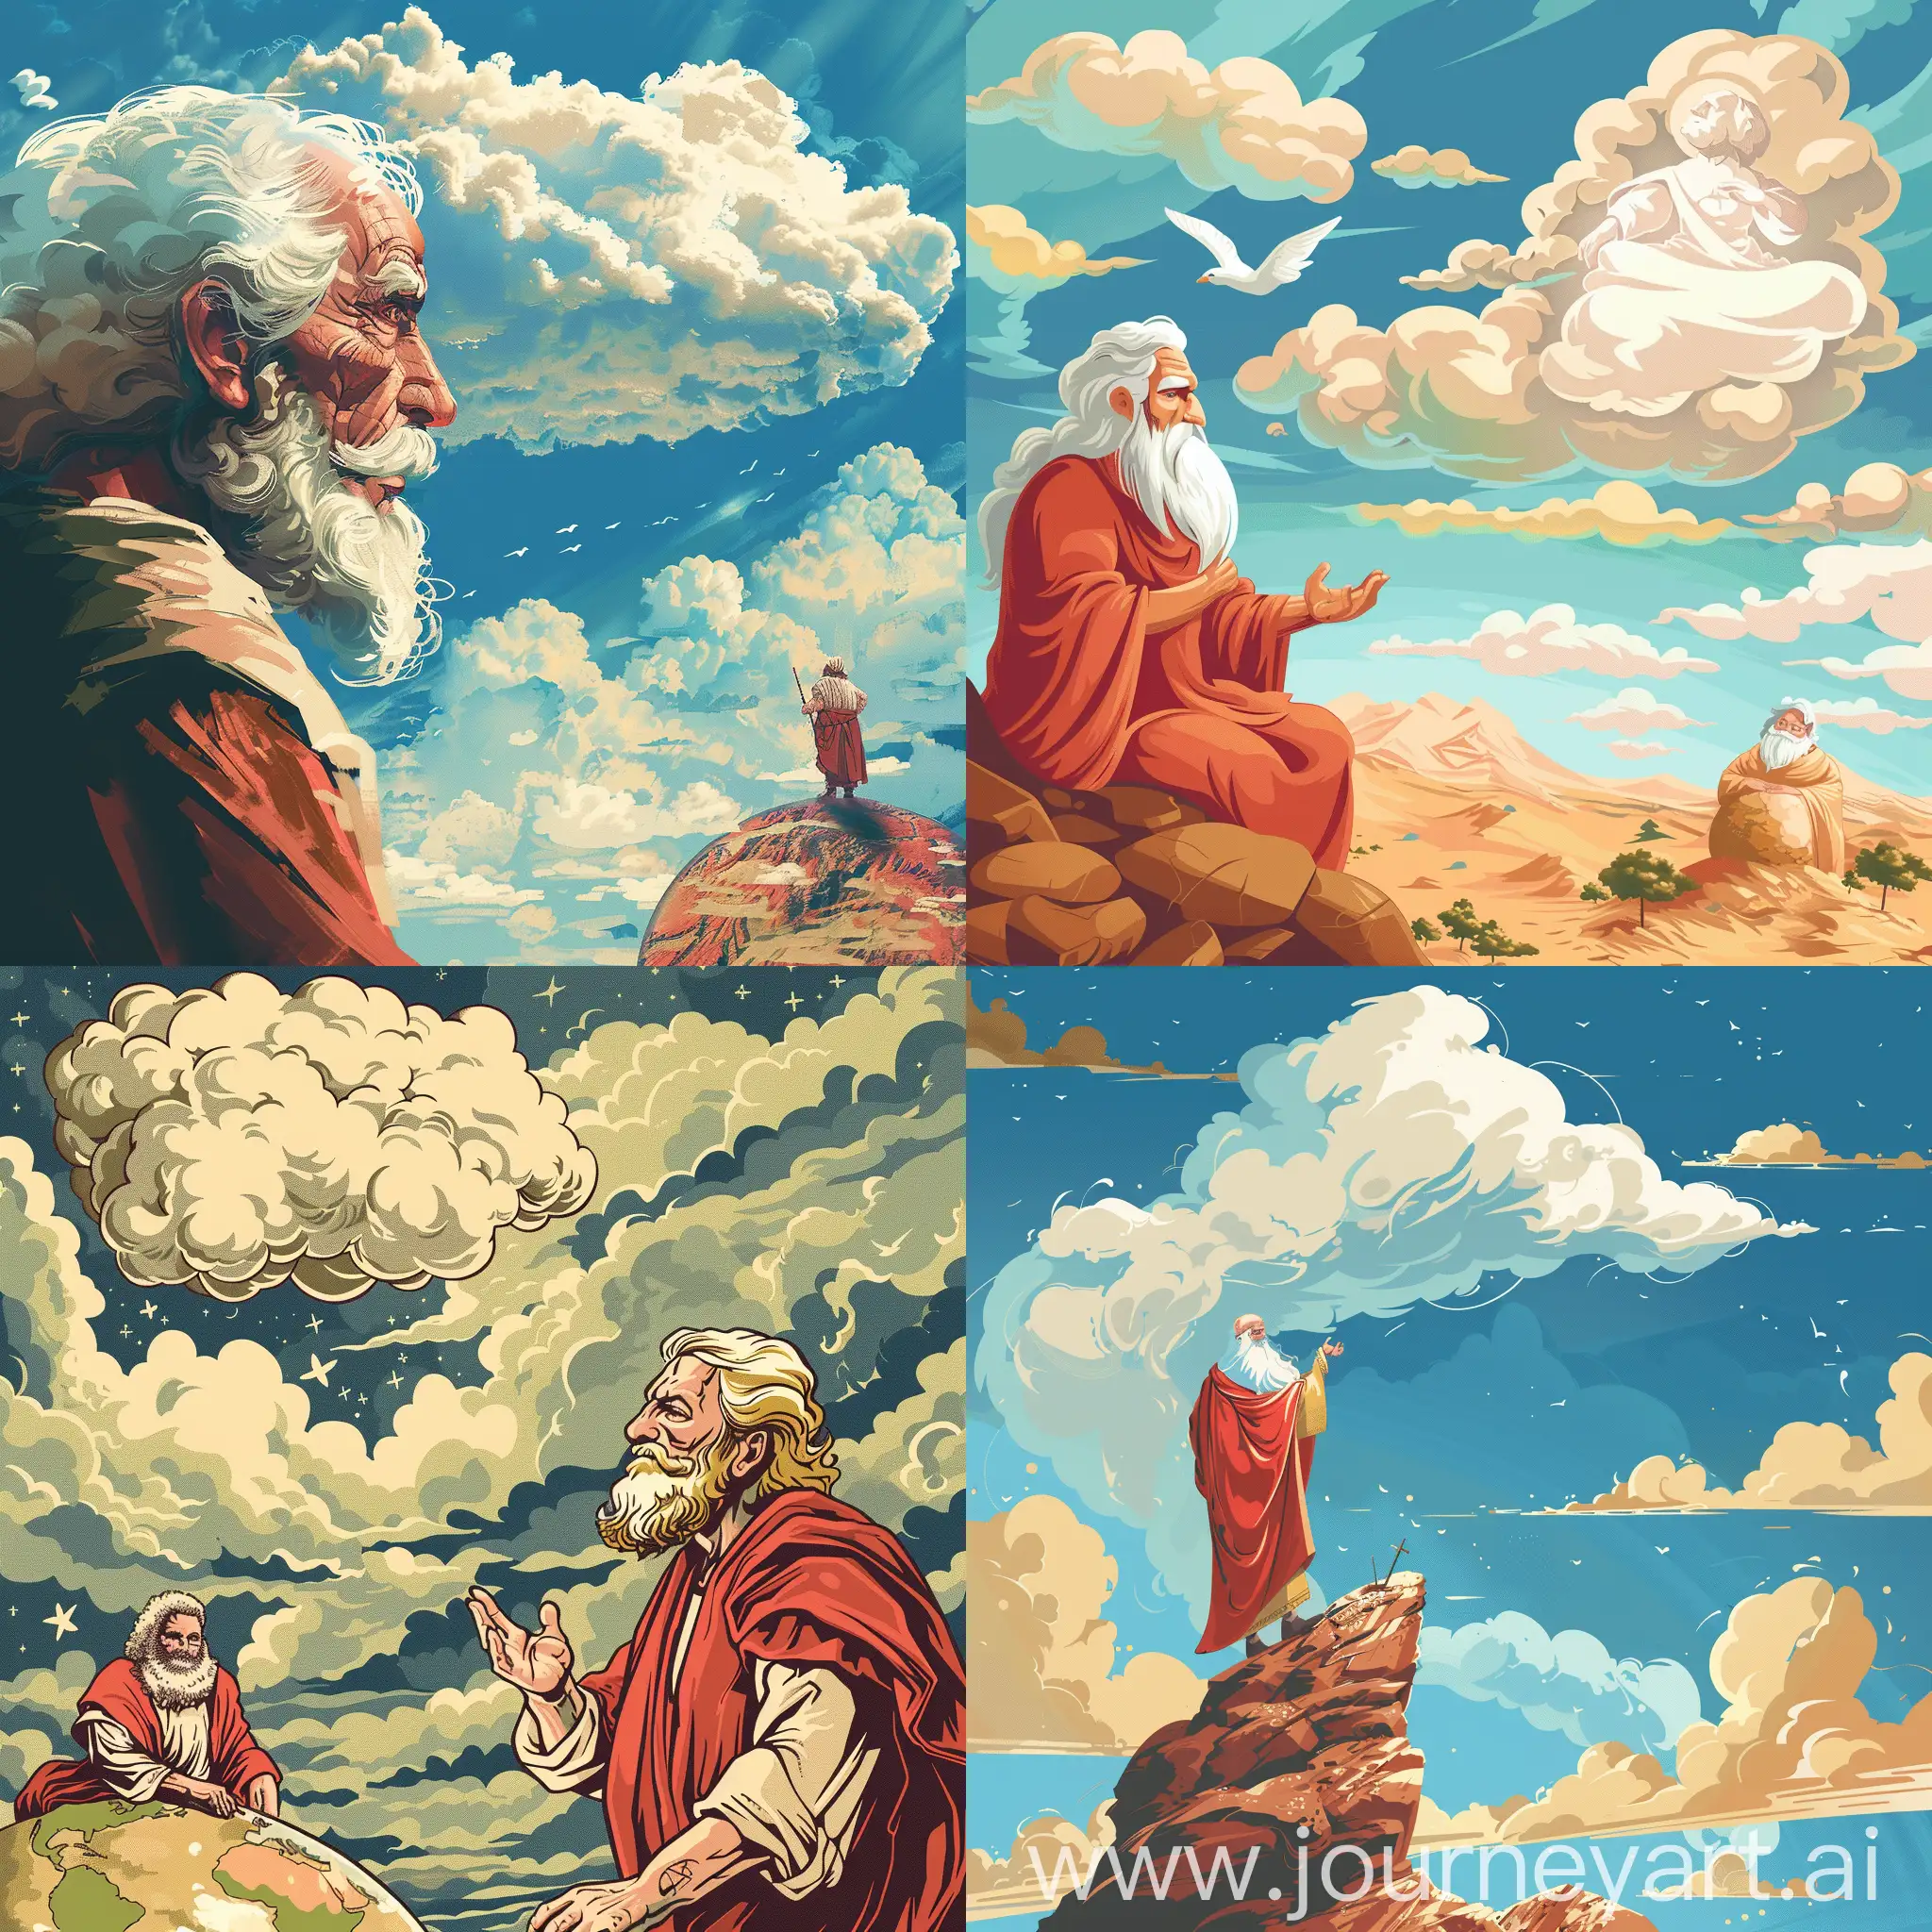 Illustration for website - God in the cloud in the sky and godfather on the earth